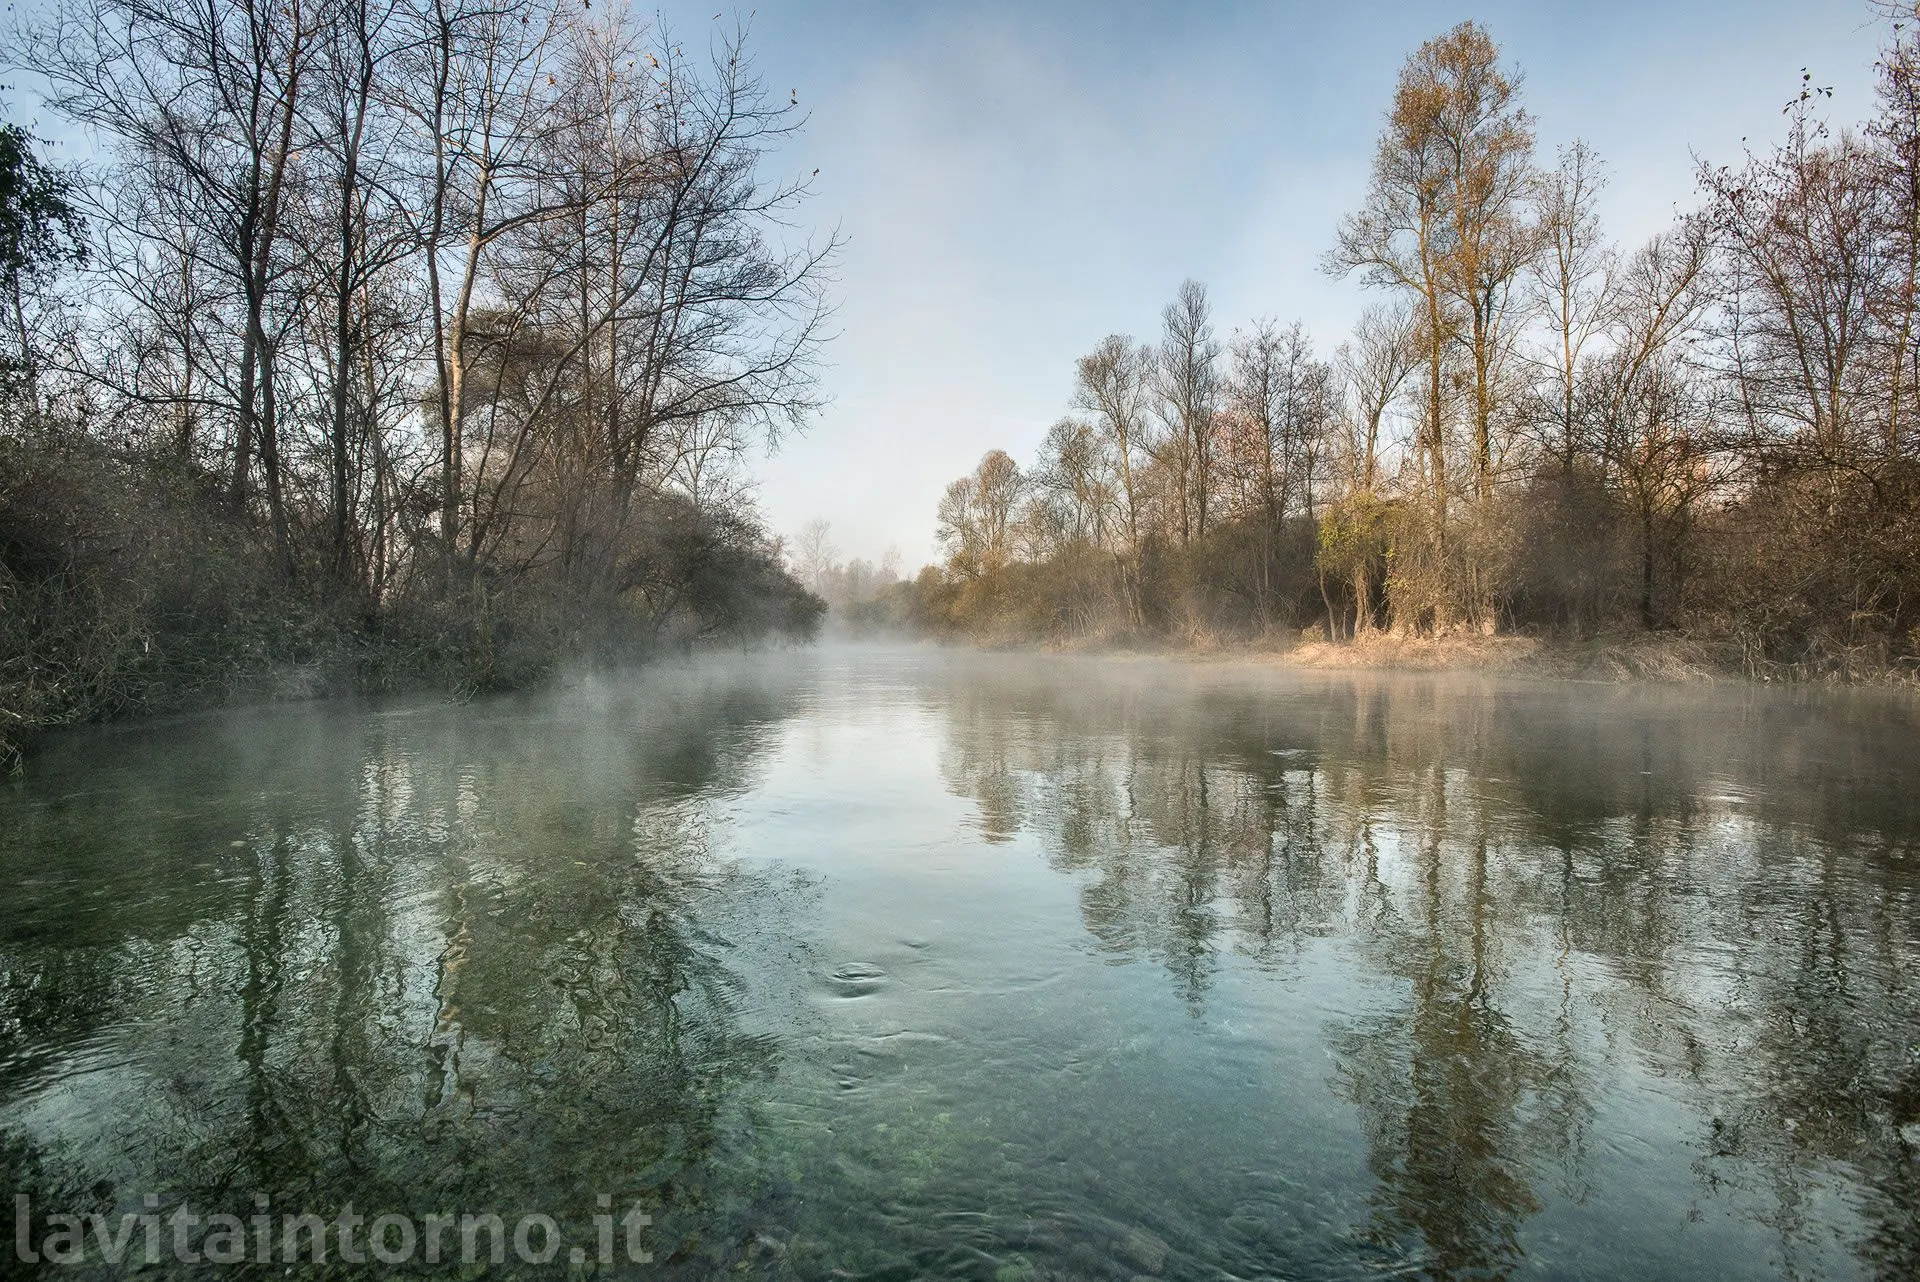 be first in the morning @ Fontane Bianche #3
D800E
Nikkor 17-35 F/2.8 AF-S 